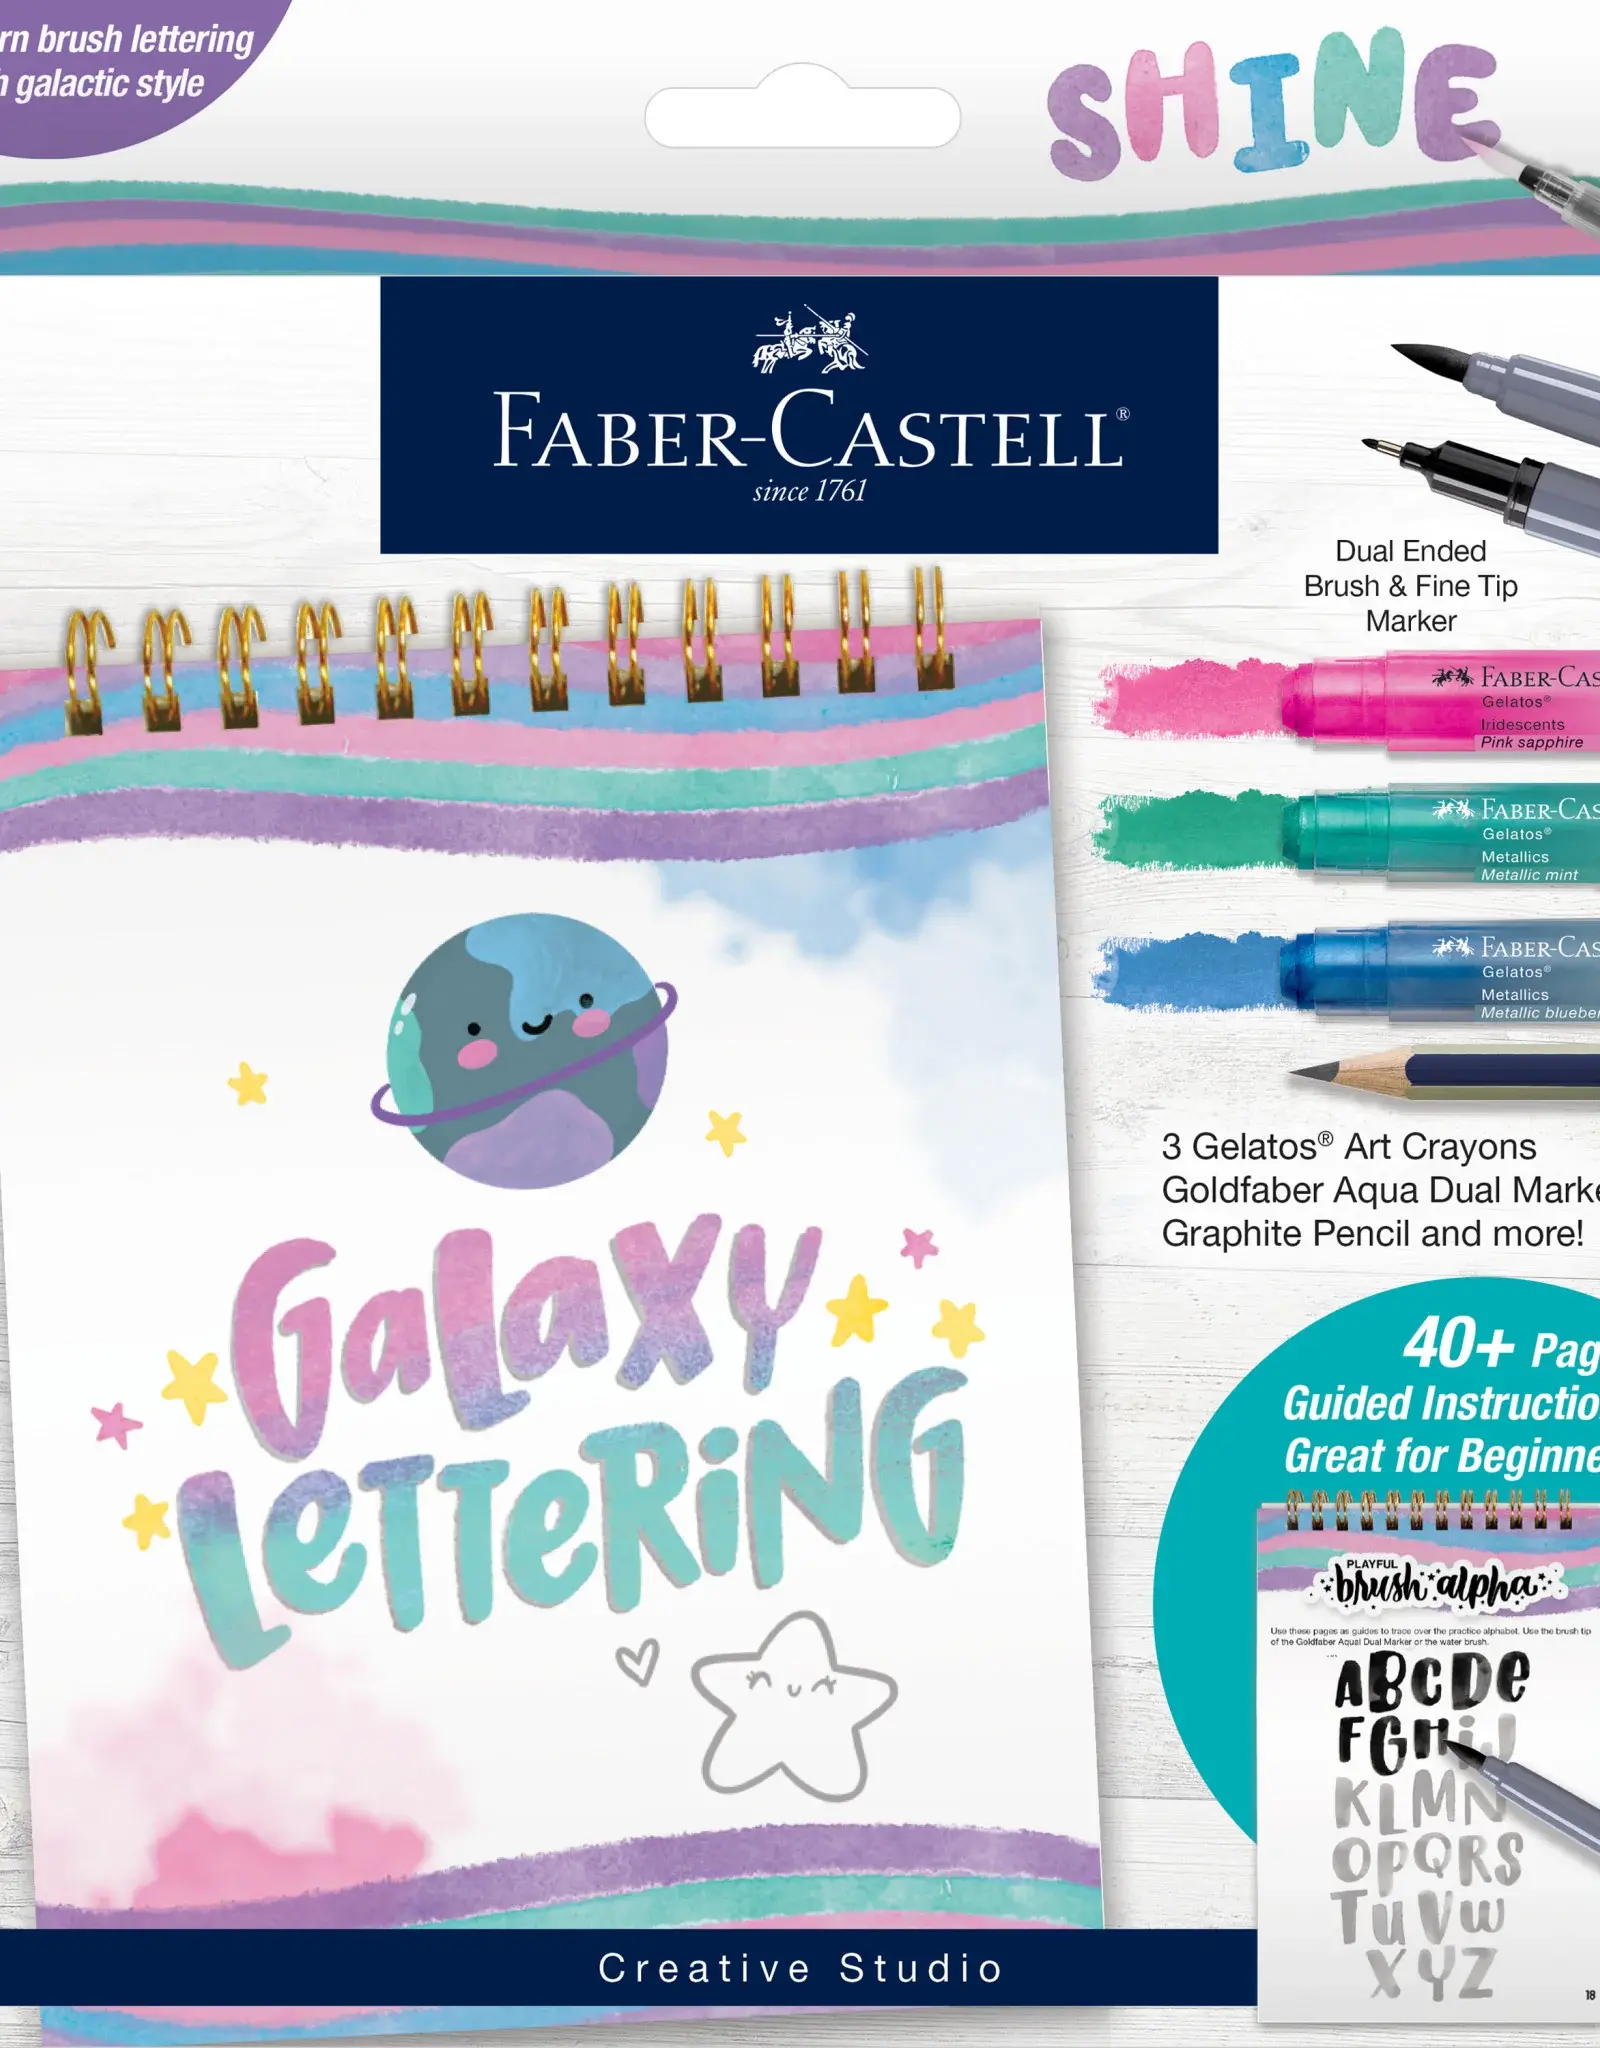 Make Practice Life Easier with Erasable Colored Pencils - Creative